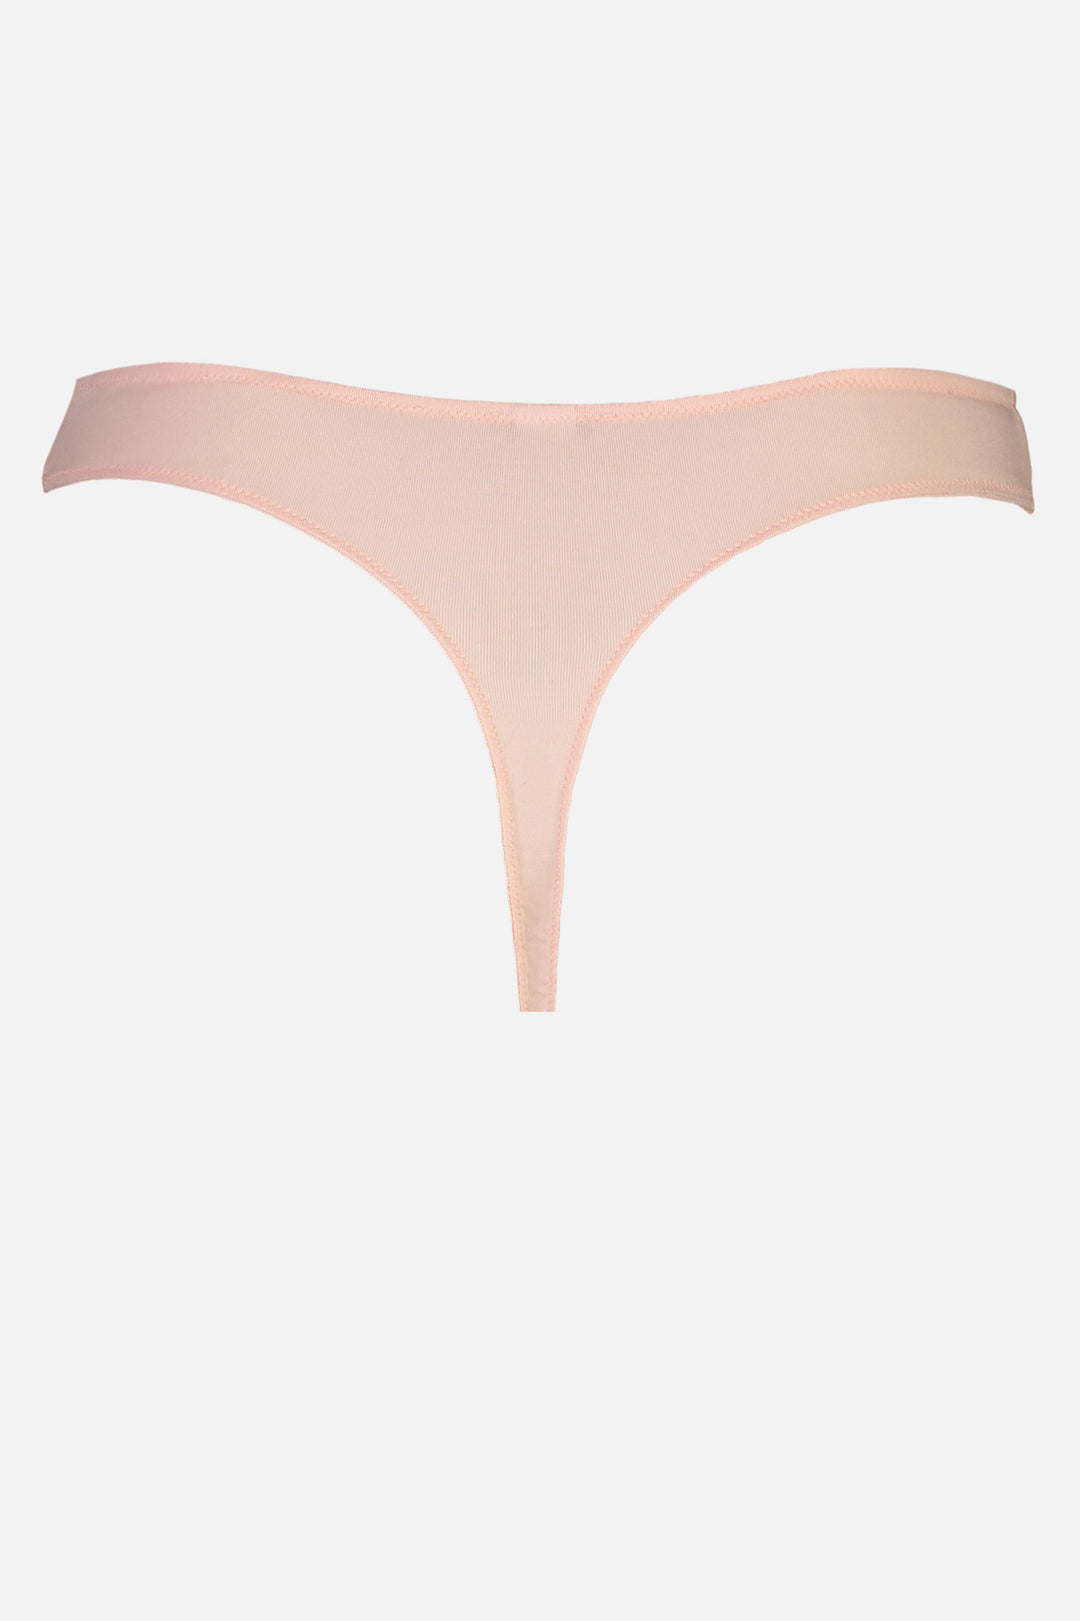 Videris Lingerie thong in pale pink TENCEL™ a comfortable flattering wide g string back with soft elastics